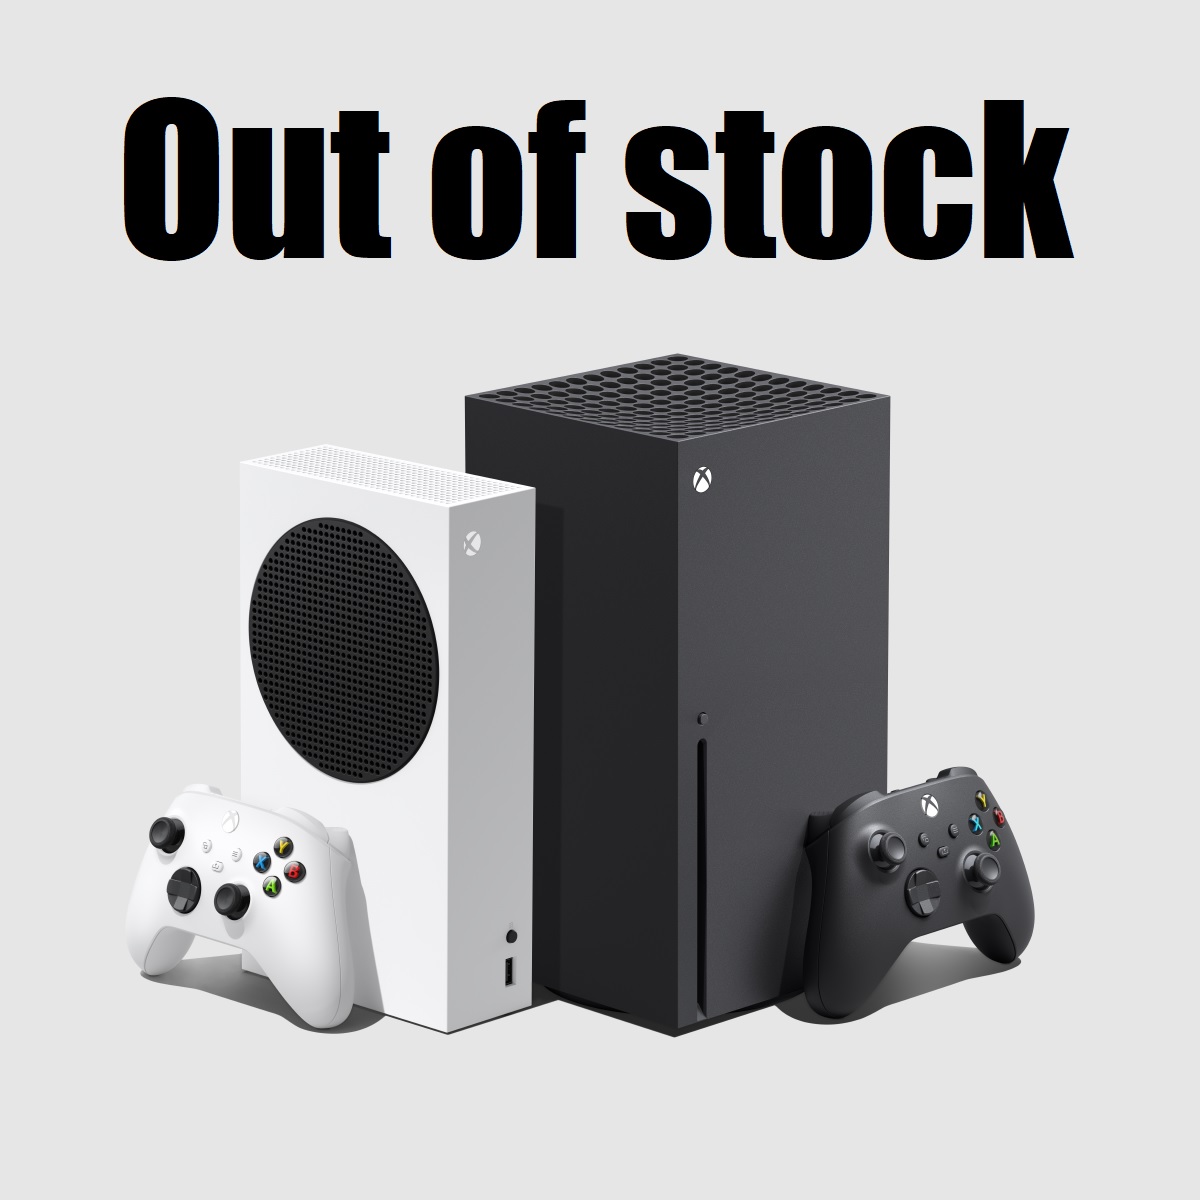 Xbox Series X and Series S meet PS5 fate in India, restocks delayed due to Covid 19